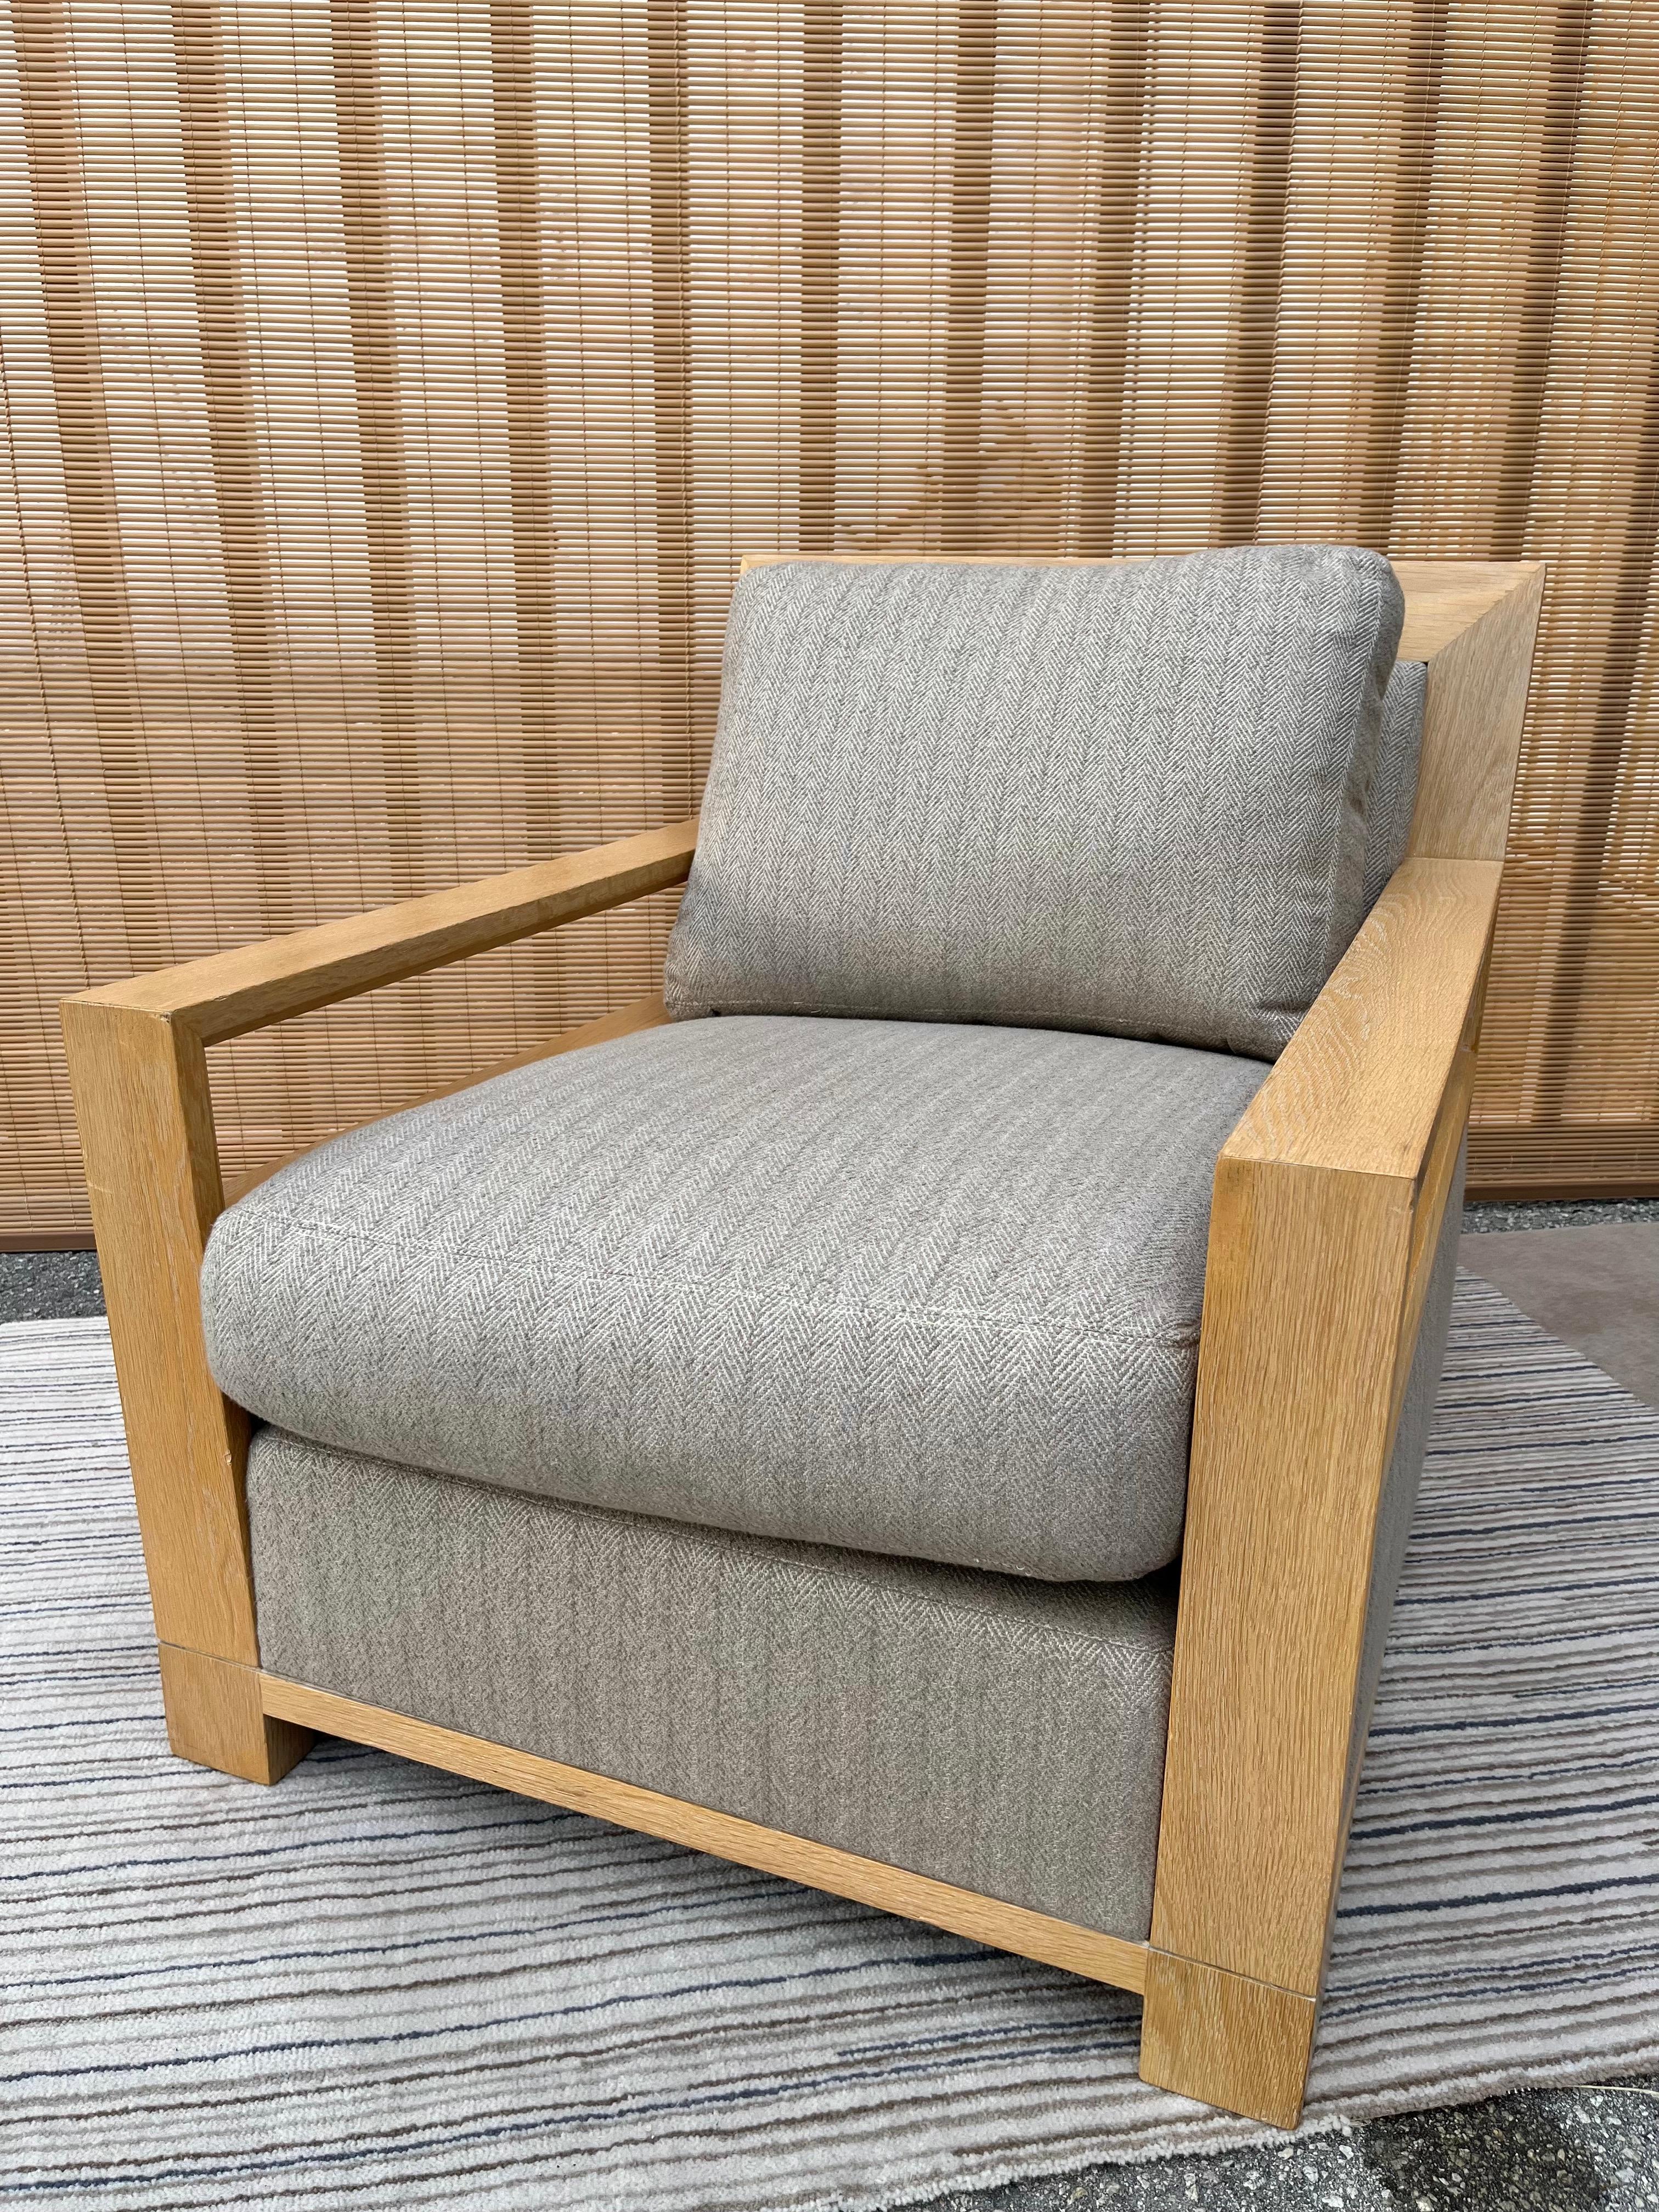 Contemporary portrait club / lounge chair by the American Designer Ted Boerner. Circa Early 21st Century. 
Features a sharp straight lines contemporary design with an exposed wood frame that surrounds the back and the arm-rests, making this